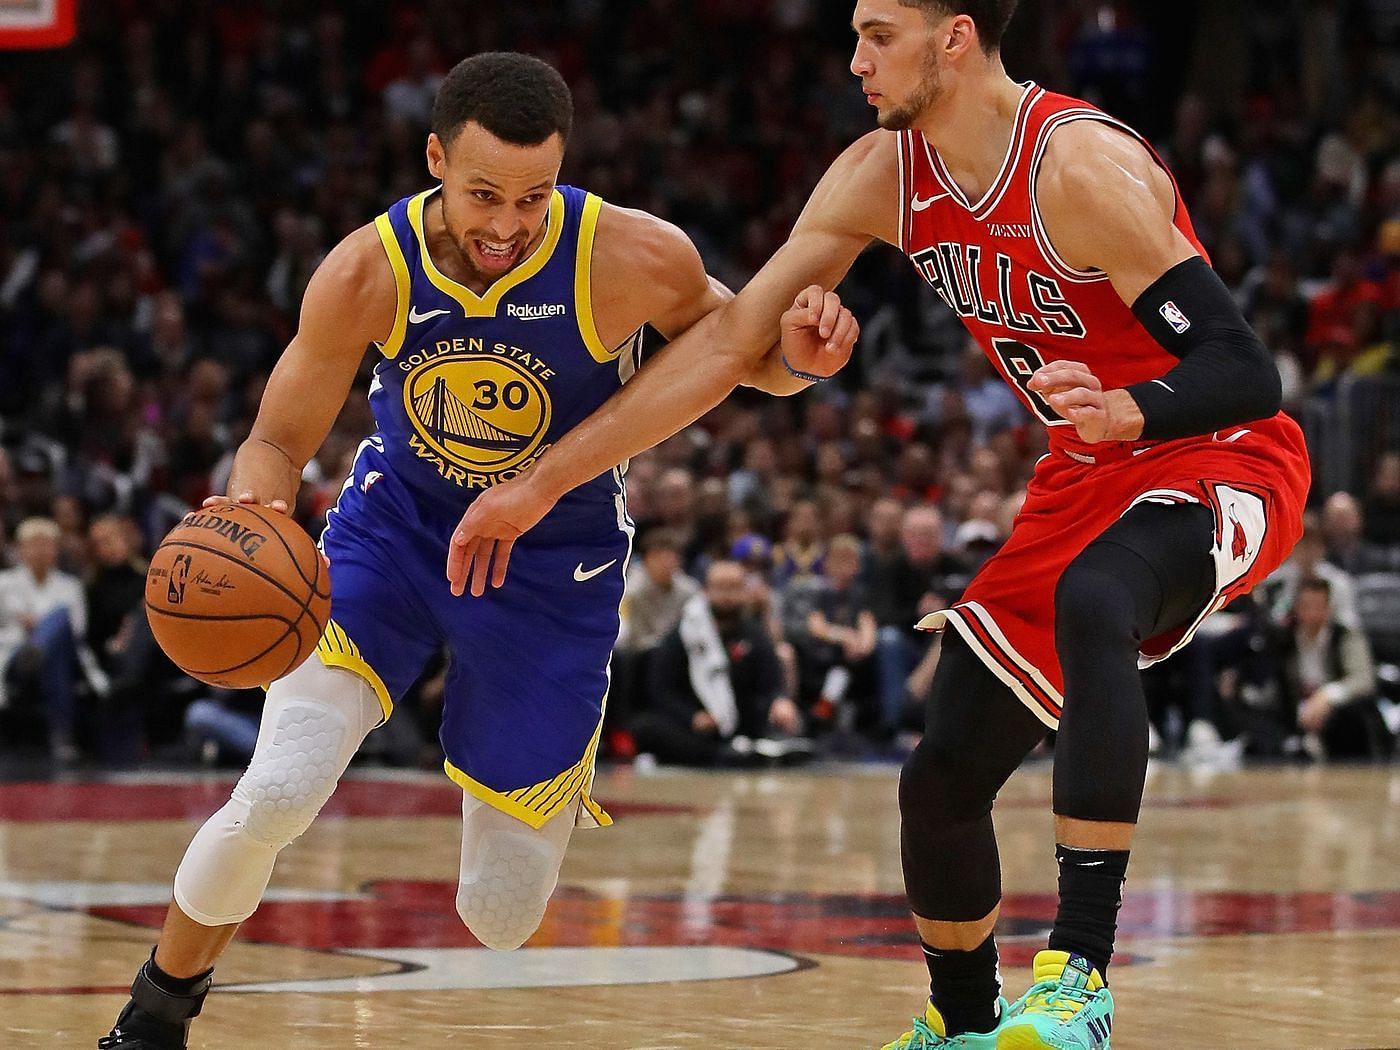 The backcourt of the Golden State Warriors and the Chicago Bulls will take center stage when the two teams meet on Friday [Photo: Golden State of Mind]